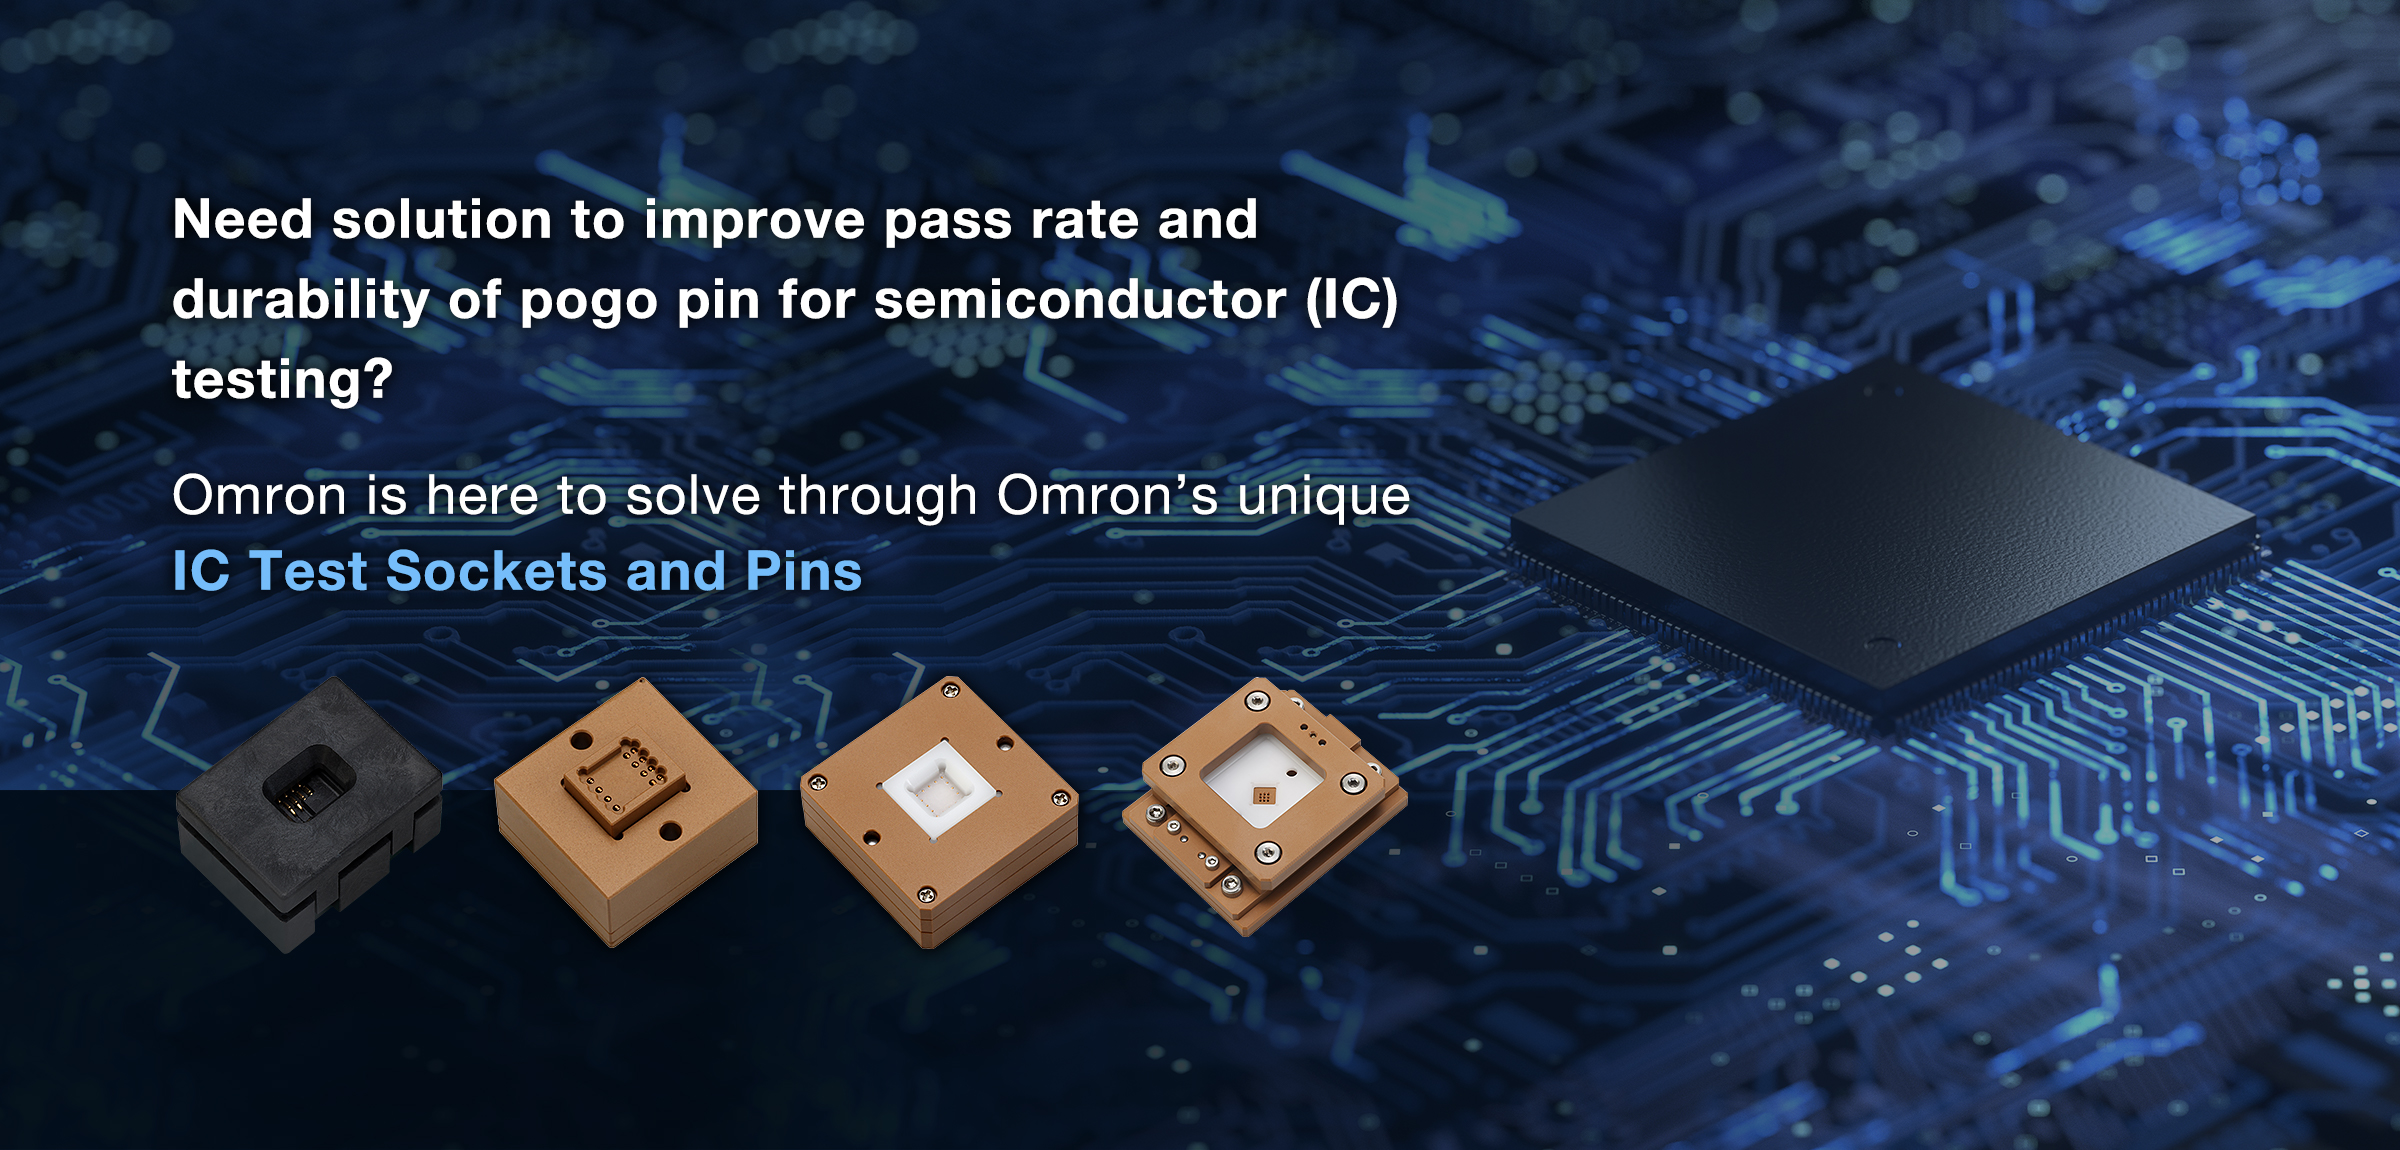 Need solution to improve pass rate and durability of pogo pin for semiconductor (IC) testing? Omron is here to solve through Omron's unique IC Test Sockets and Pins